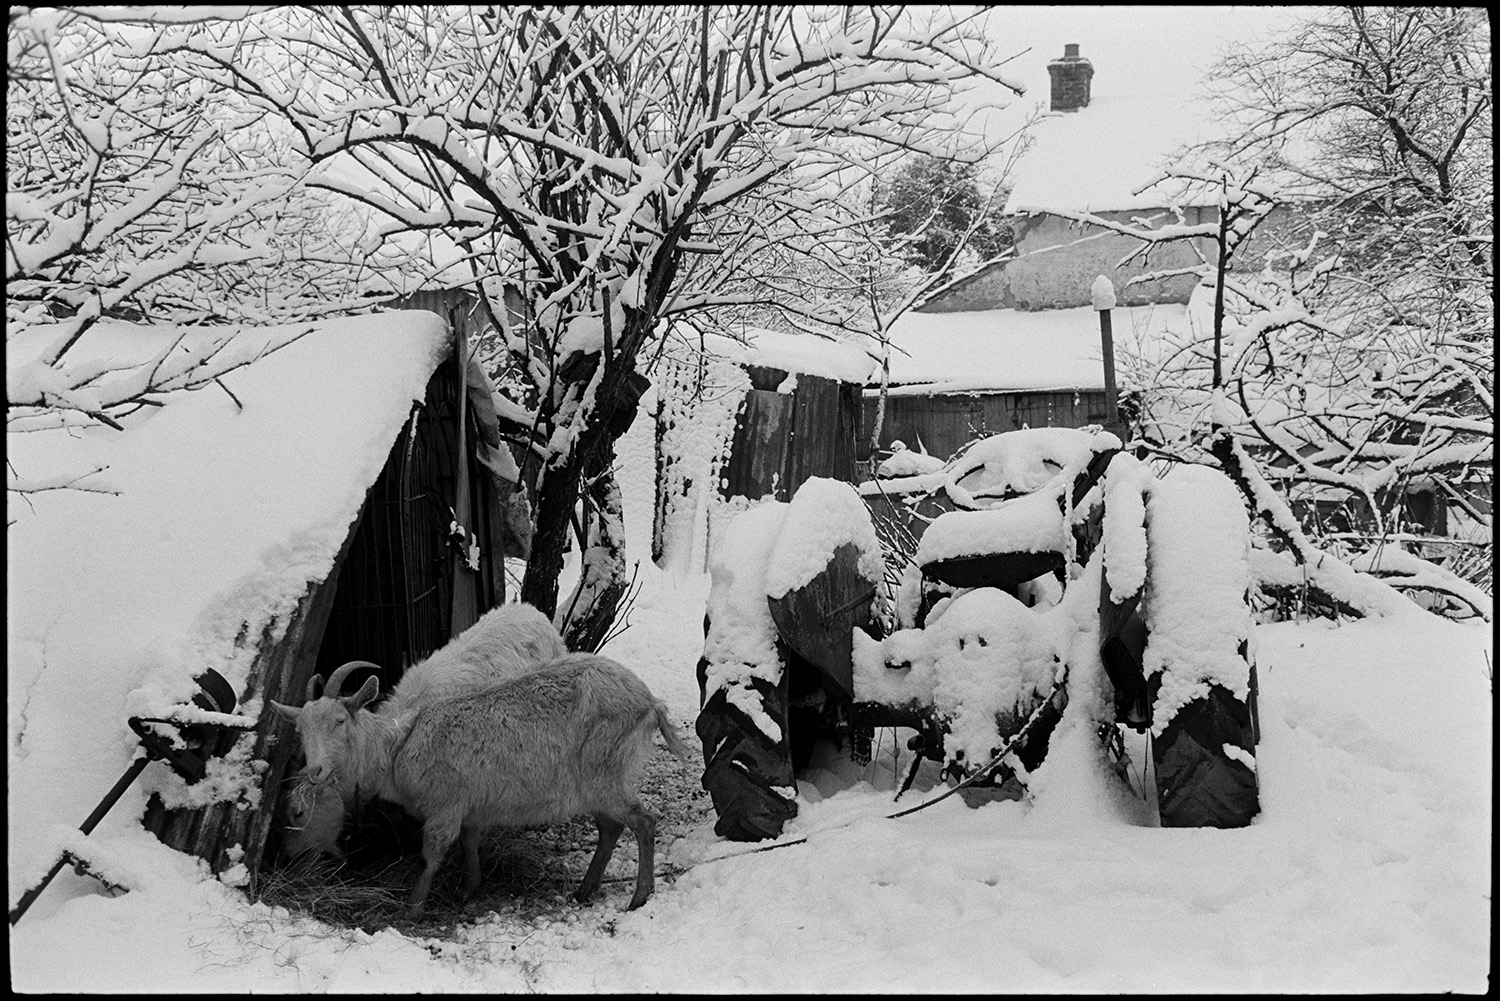 Snow, sheep and goats sheltering in farmyard huts and pens. Woman farmer checking animals. Barn.
[Two goats eating hay in the farmyard at Cupper's Piece, Beaford. Snow covers the yard, including the sheds, a tractor, the farmhouse roof and surrounding trees.]